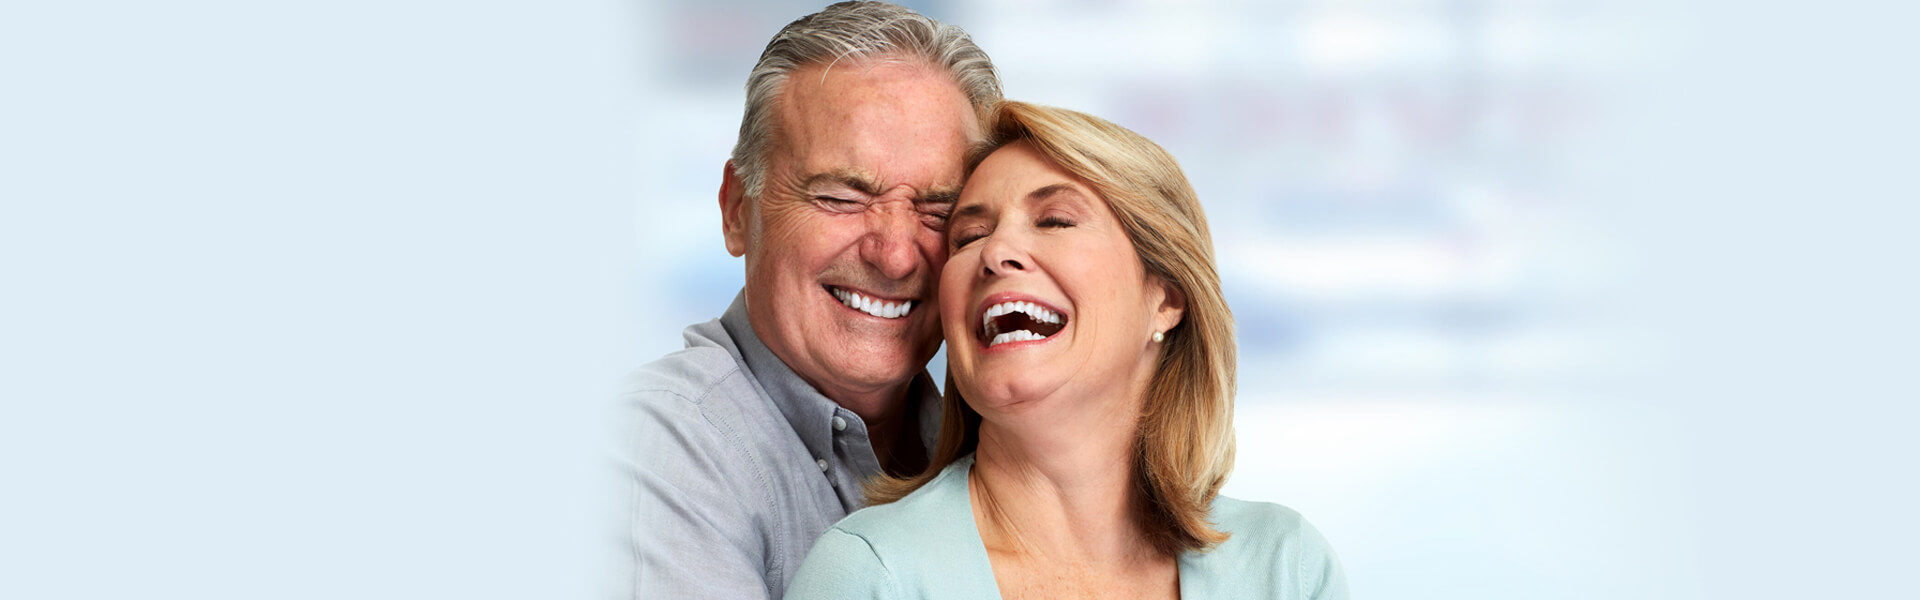 Can You Get Permanent Partial Dentures? Do They Look Natural?